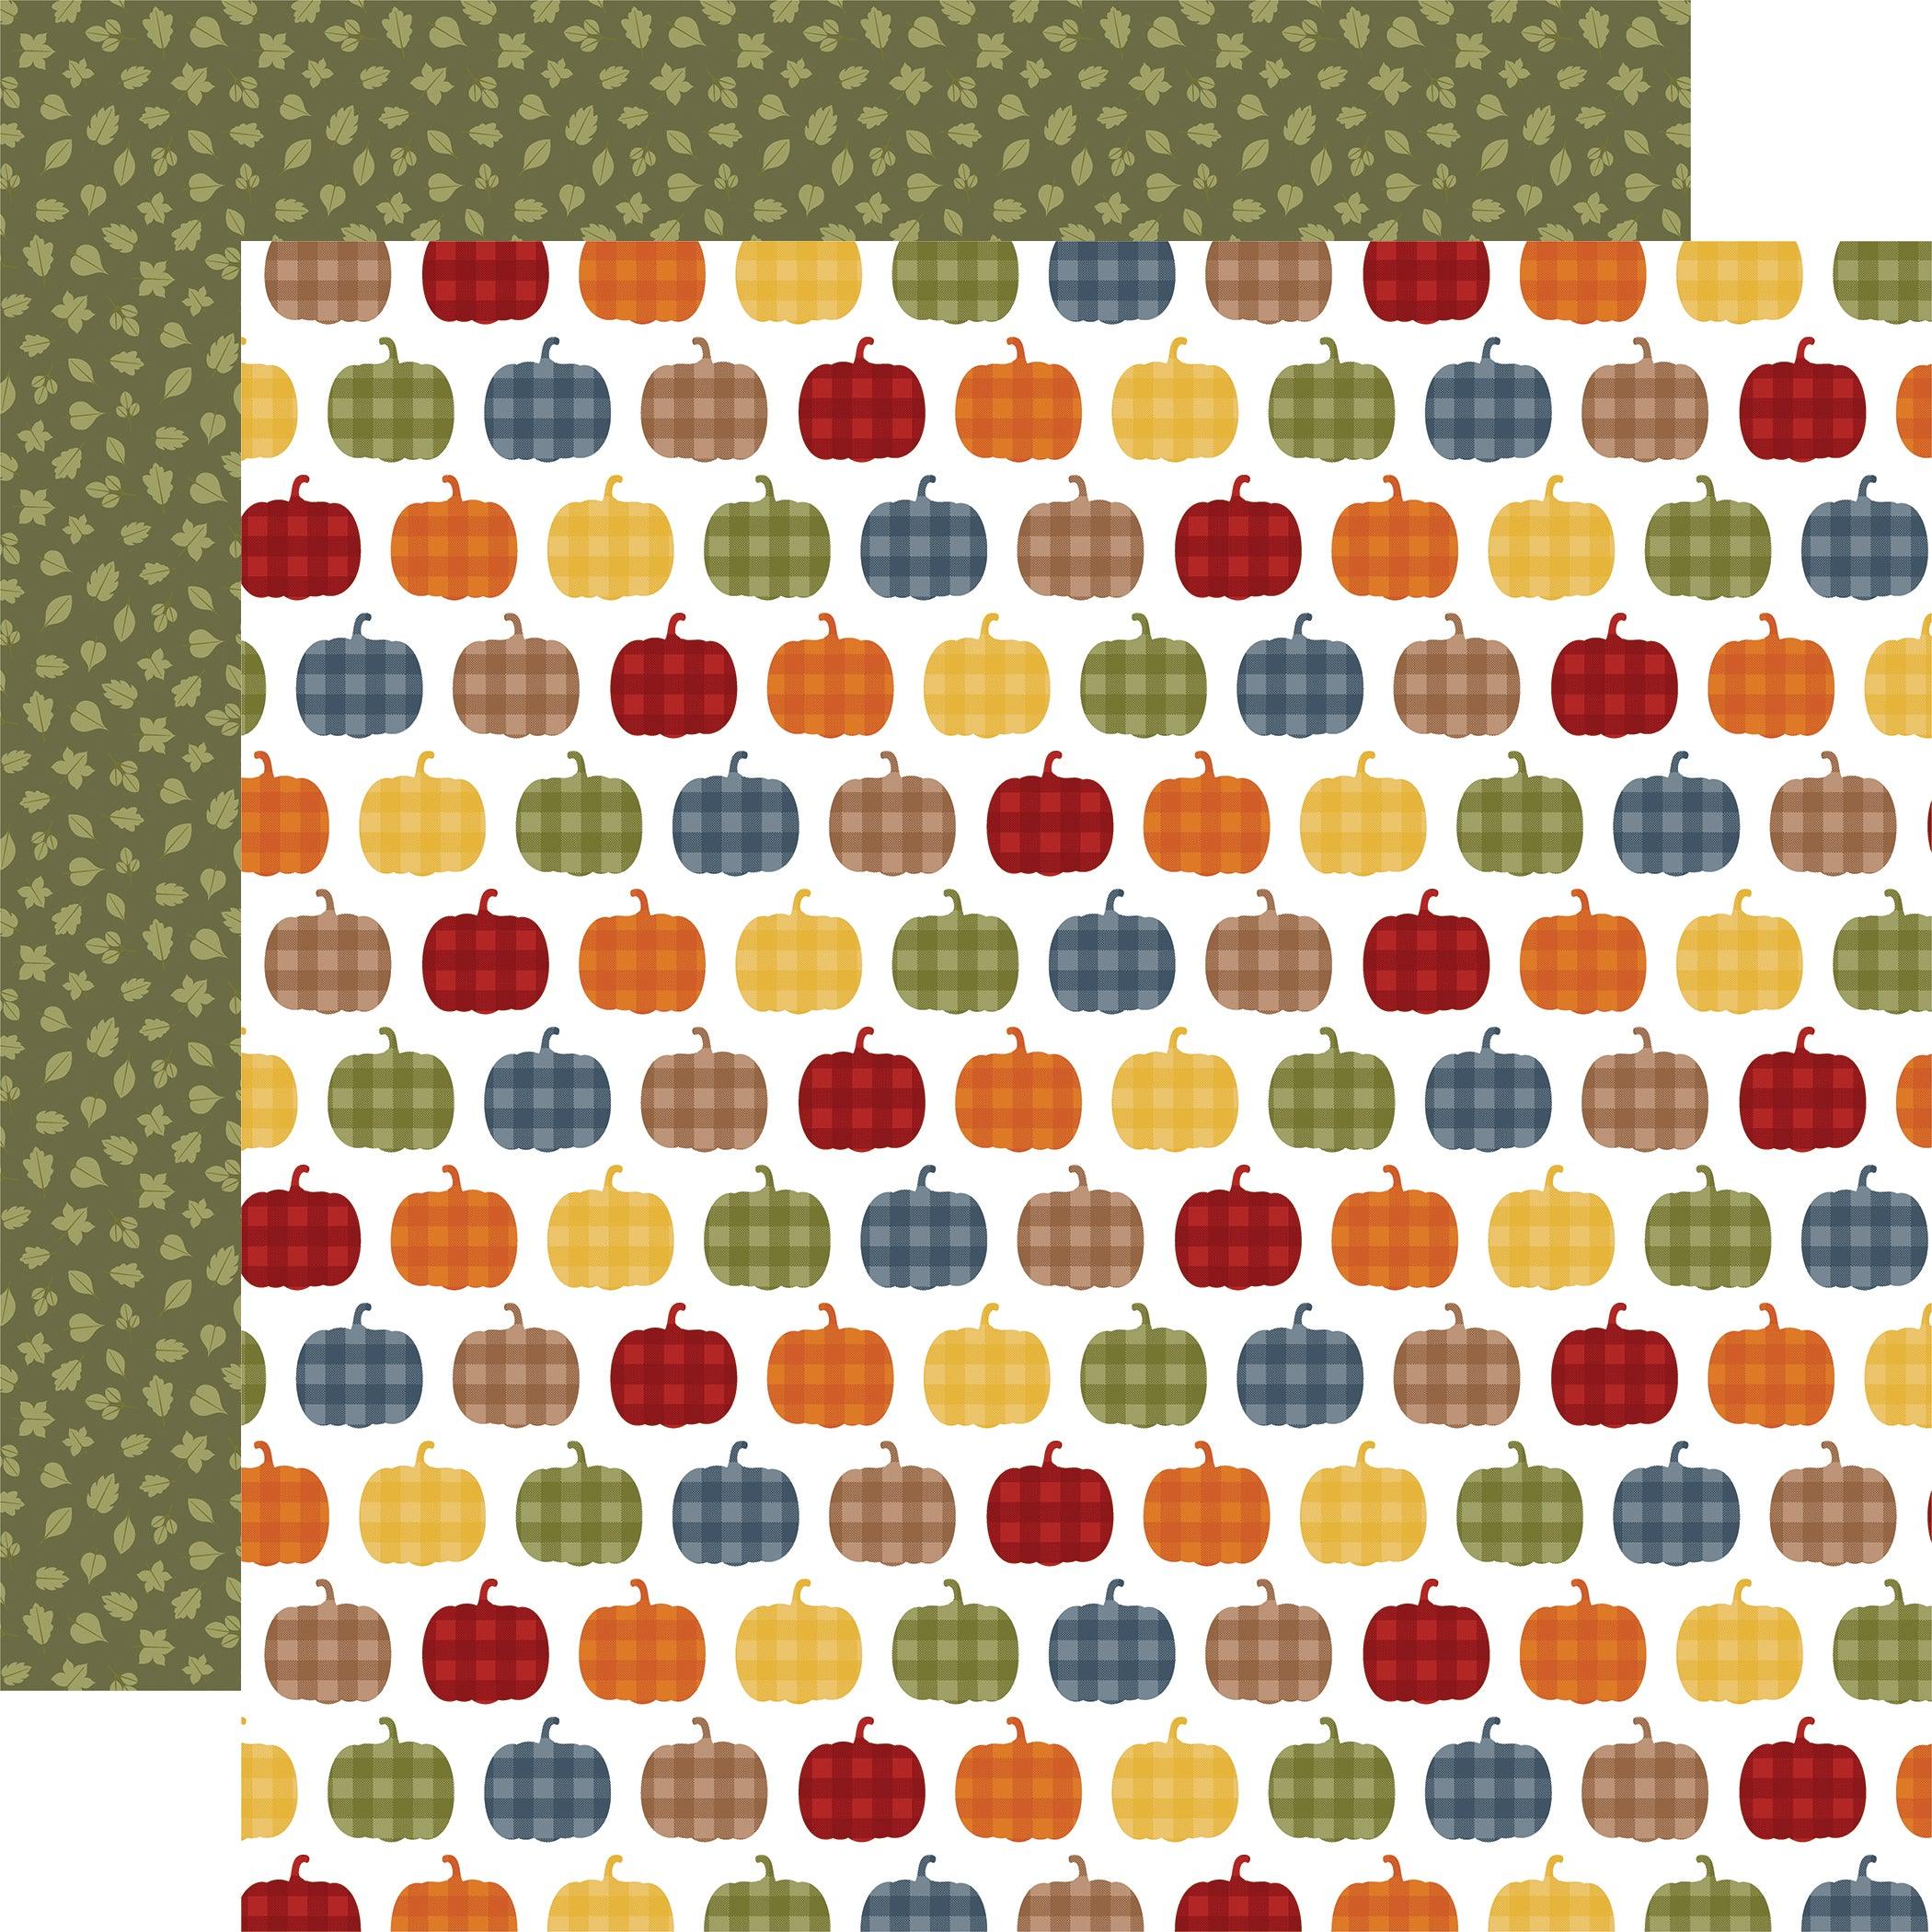 Fall Fever Collection Gingham Gourds 12 x 12 Double-Sided Scrapbook Paper by Echo Park Paper - Scrapbook Supply Companies